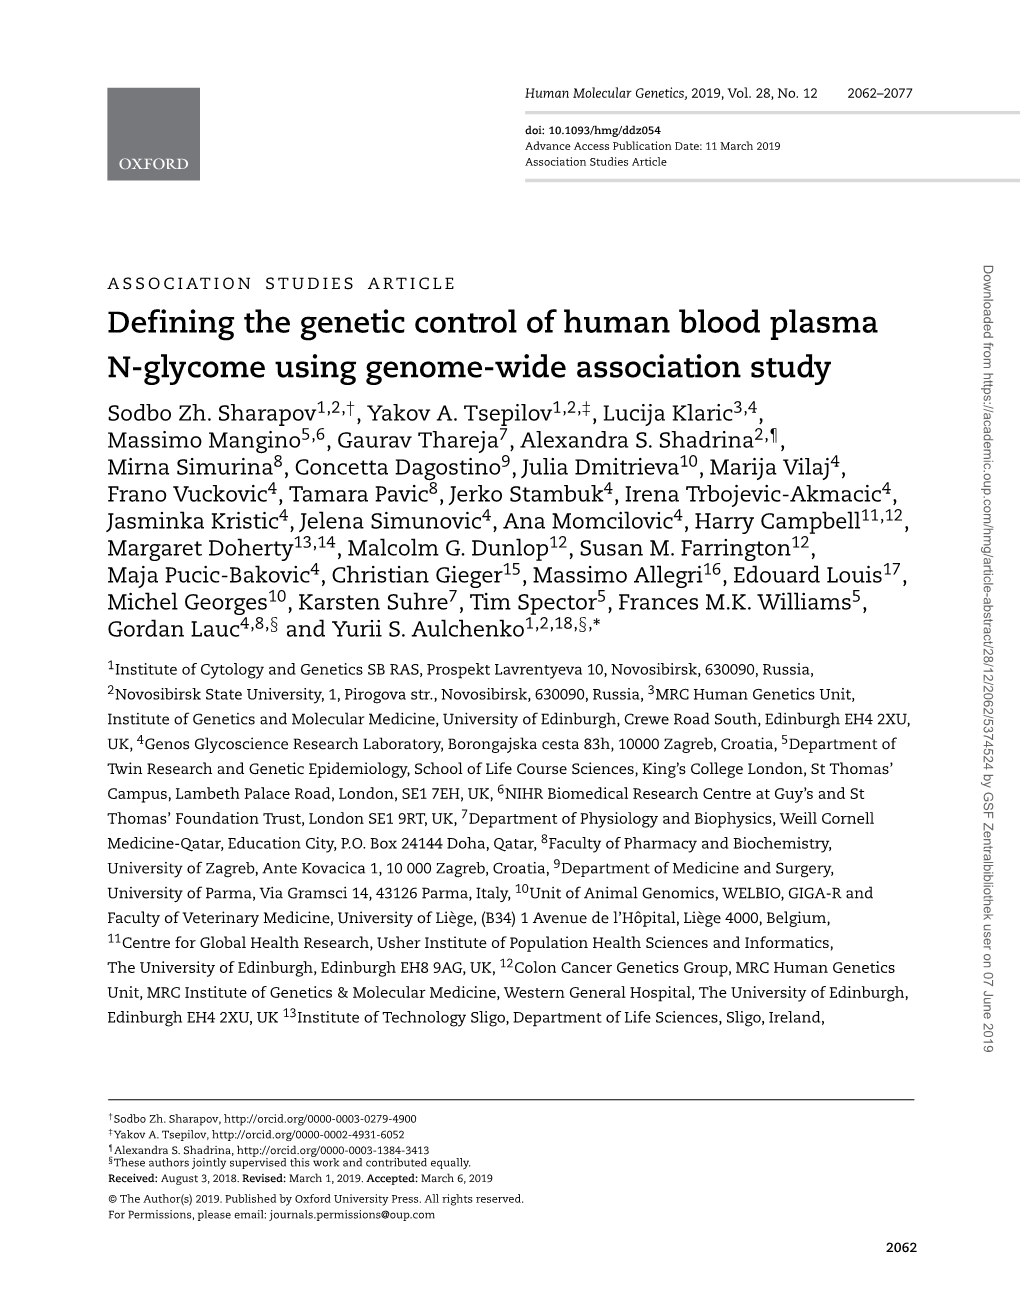 Defining the Genetic Control of Human Blood Plasma N-Glycome Using Genome-Wide Association Study Sodbo Zh